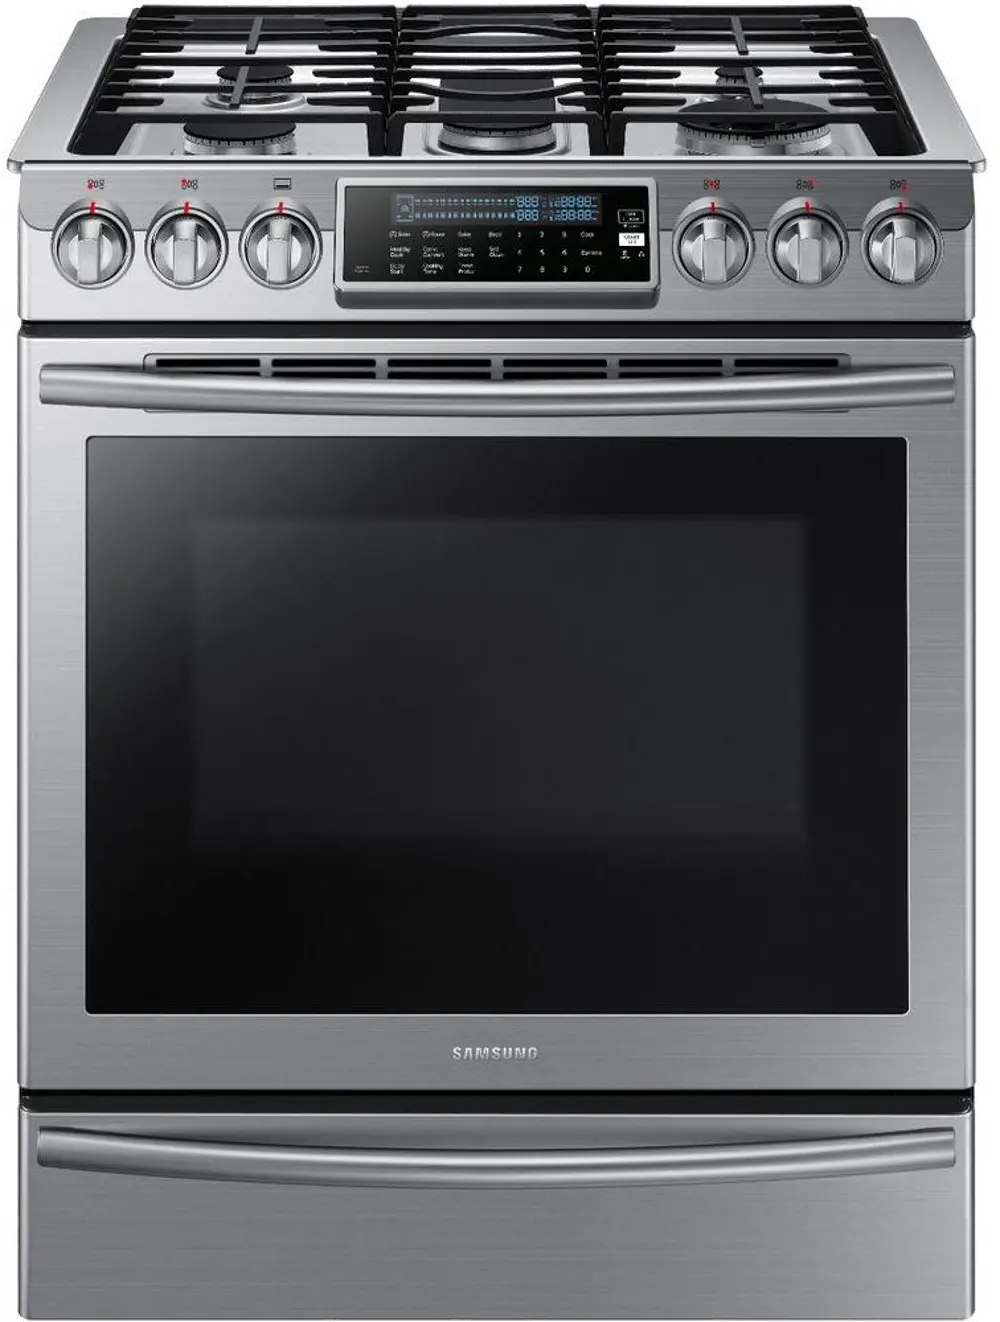 NX58H9500WS Samsung Gas Range with Flexibile Cooktop - 5.8 cu. ft. Stainless Steel-1